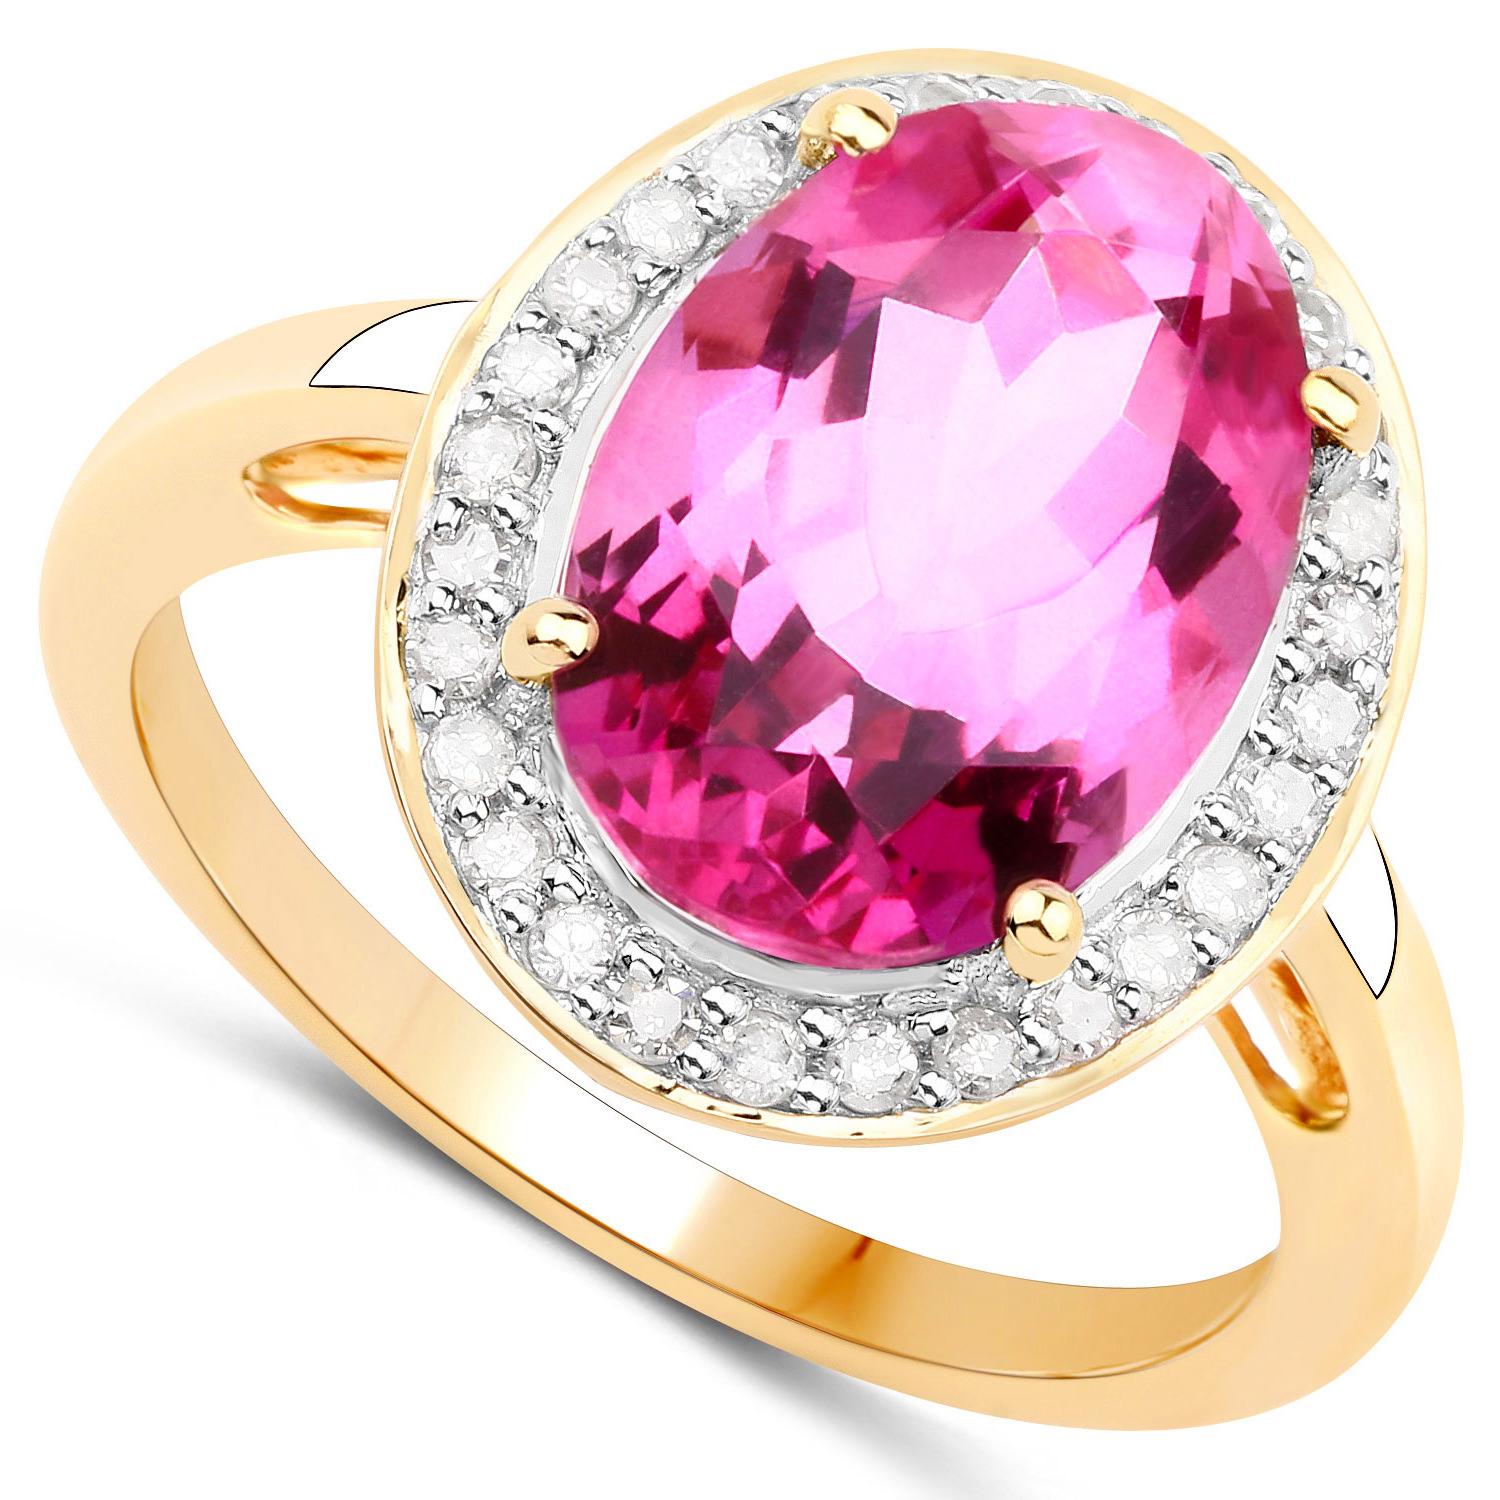 Natural Pink Topaz and Diamond Halo Cocktail Ring 5.70 Carats 14K Yellow Gold In Excellent Condition For Sale In Laguna Niguel, CA